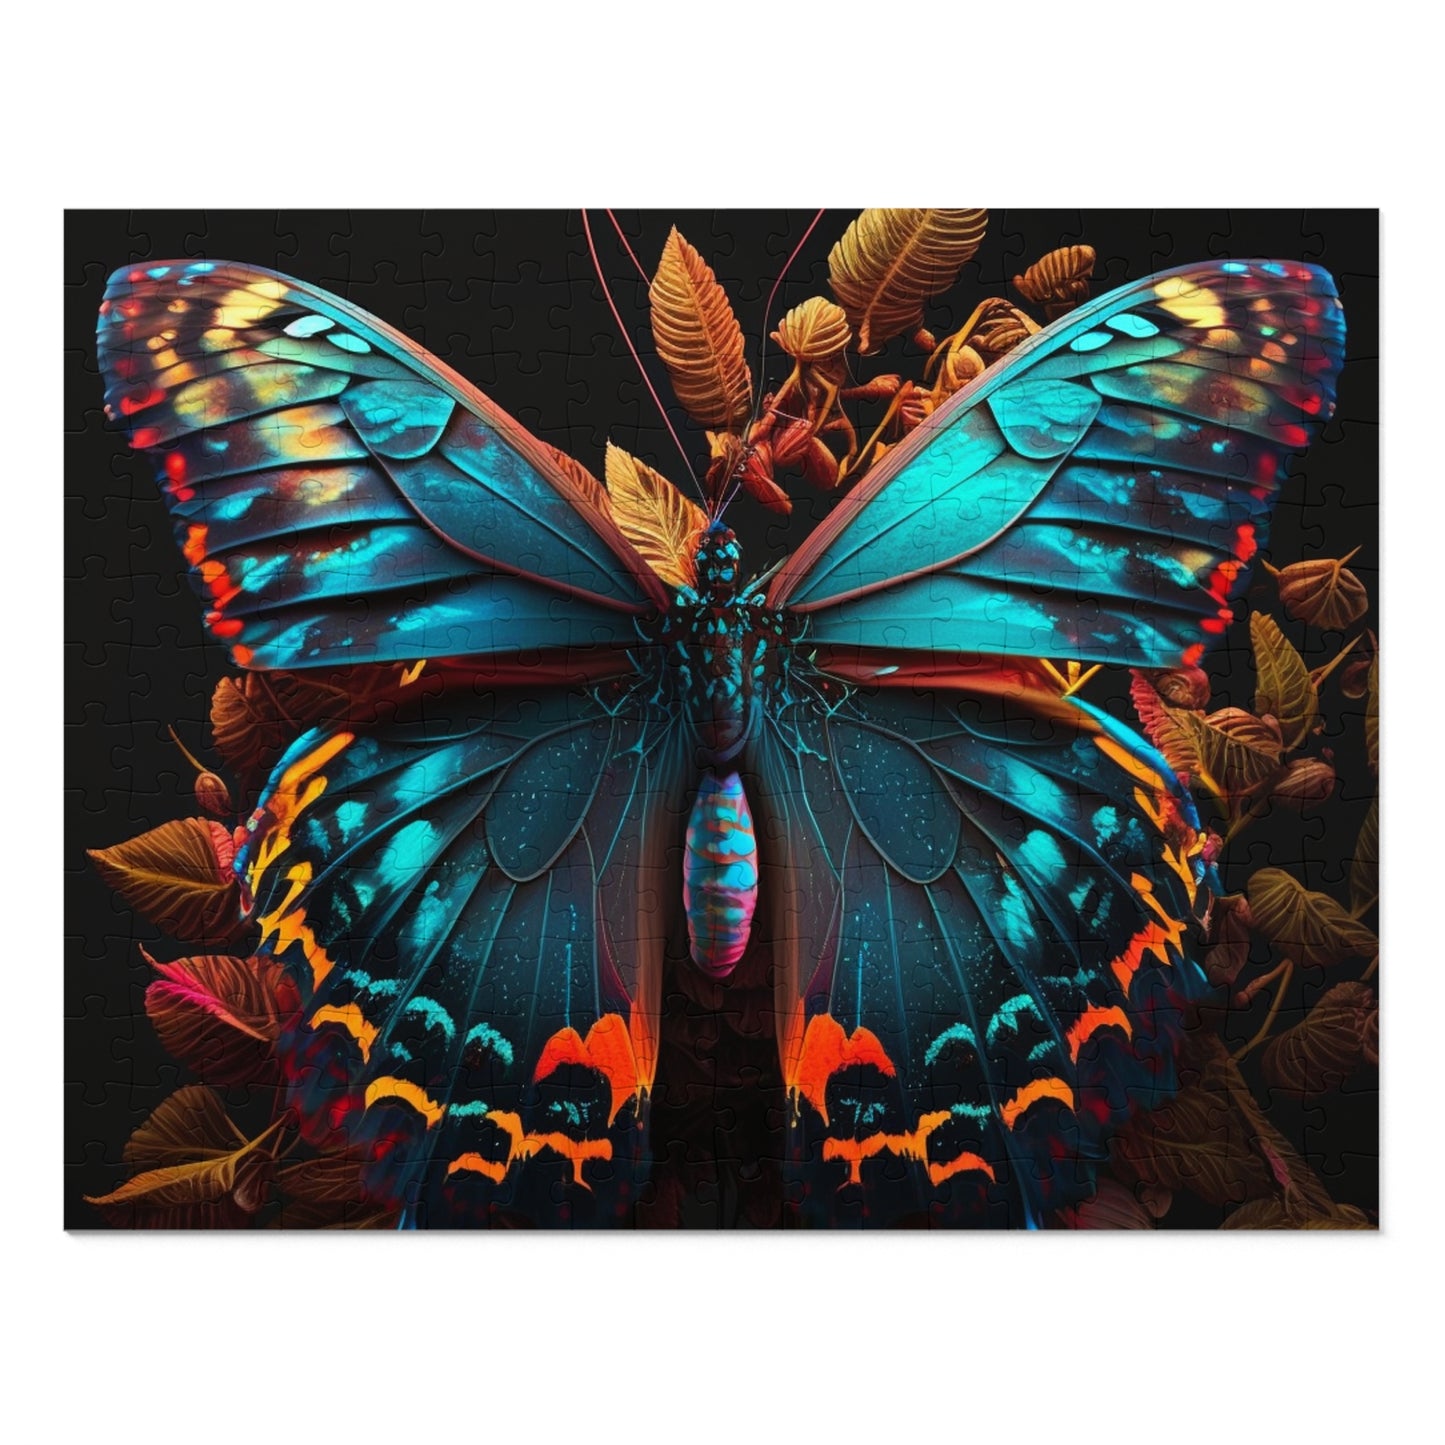 Jigsaw Puzzle (30, 110, 252, 500,1000-Piece) Hue Neon Butterfly 1